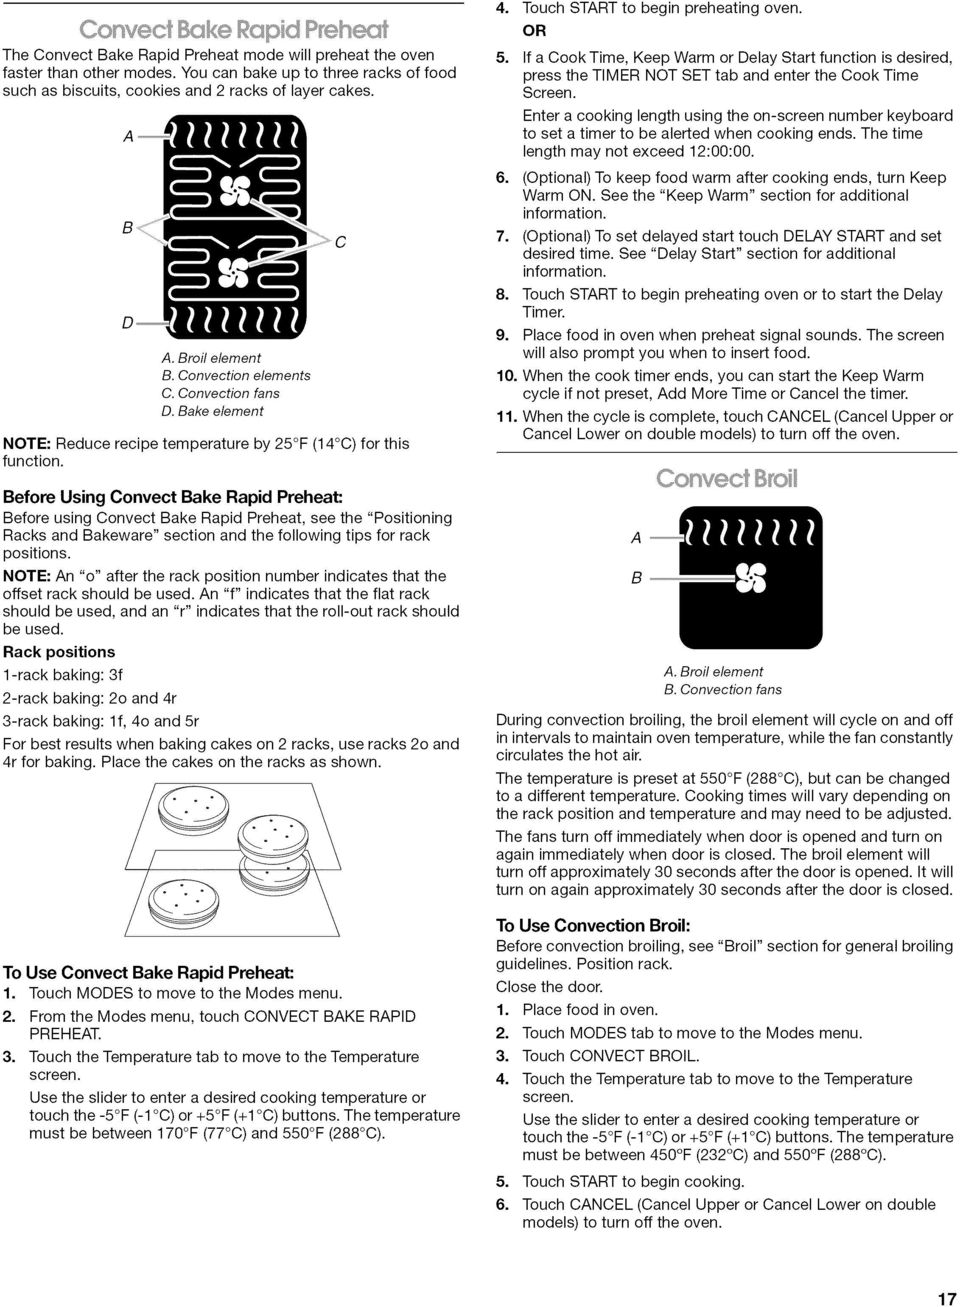 by 25 F (14 C) for this Before Using Convect Bake Rapid Preheat: Before using Convect Bake Rapid Preheat, see the "Positioning Racks and Bakeware" section and the following tips for rack positions.